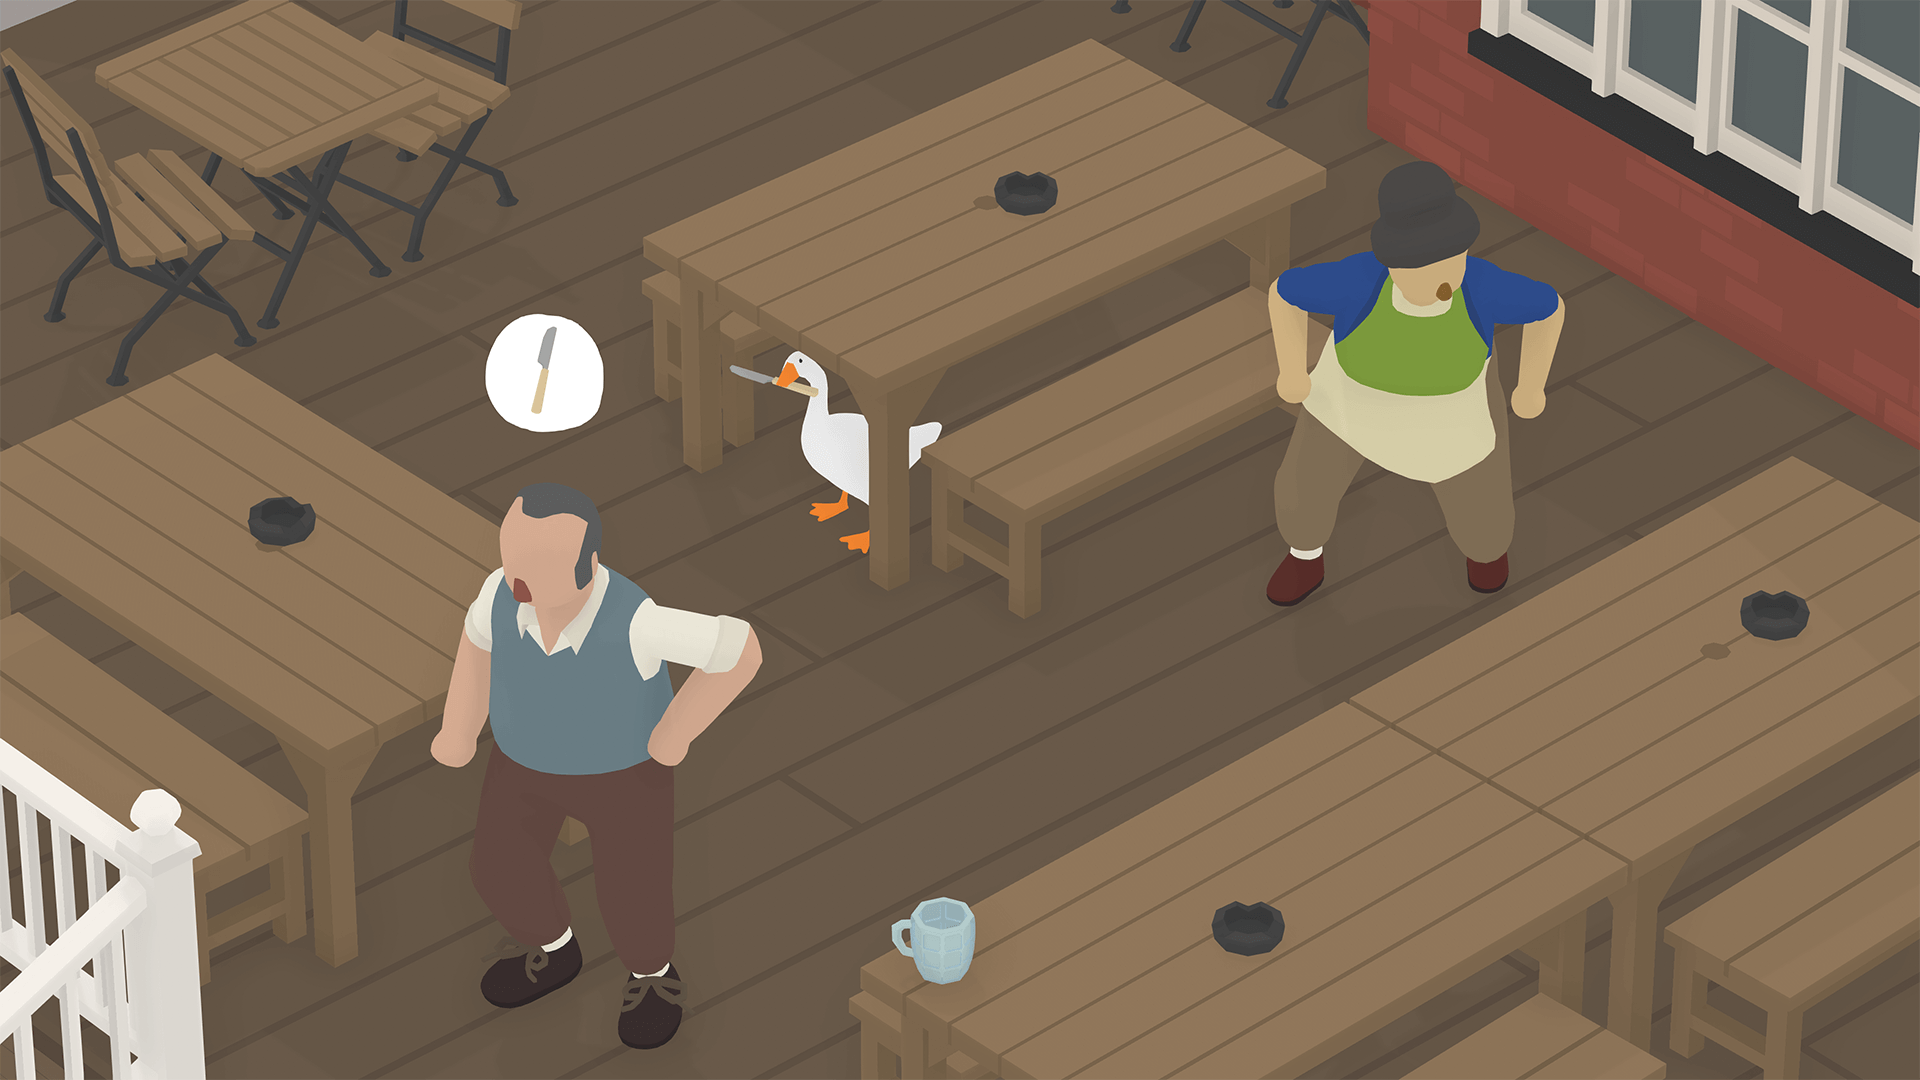 Untitled Goose Game - the goose is hiding under the table with a table knife in beak